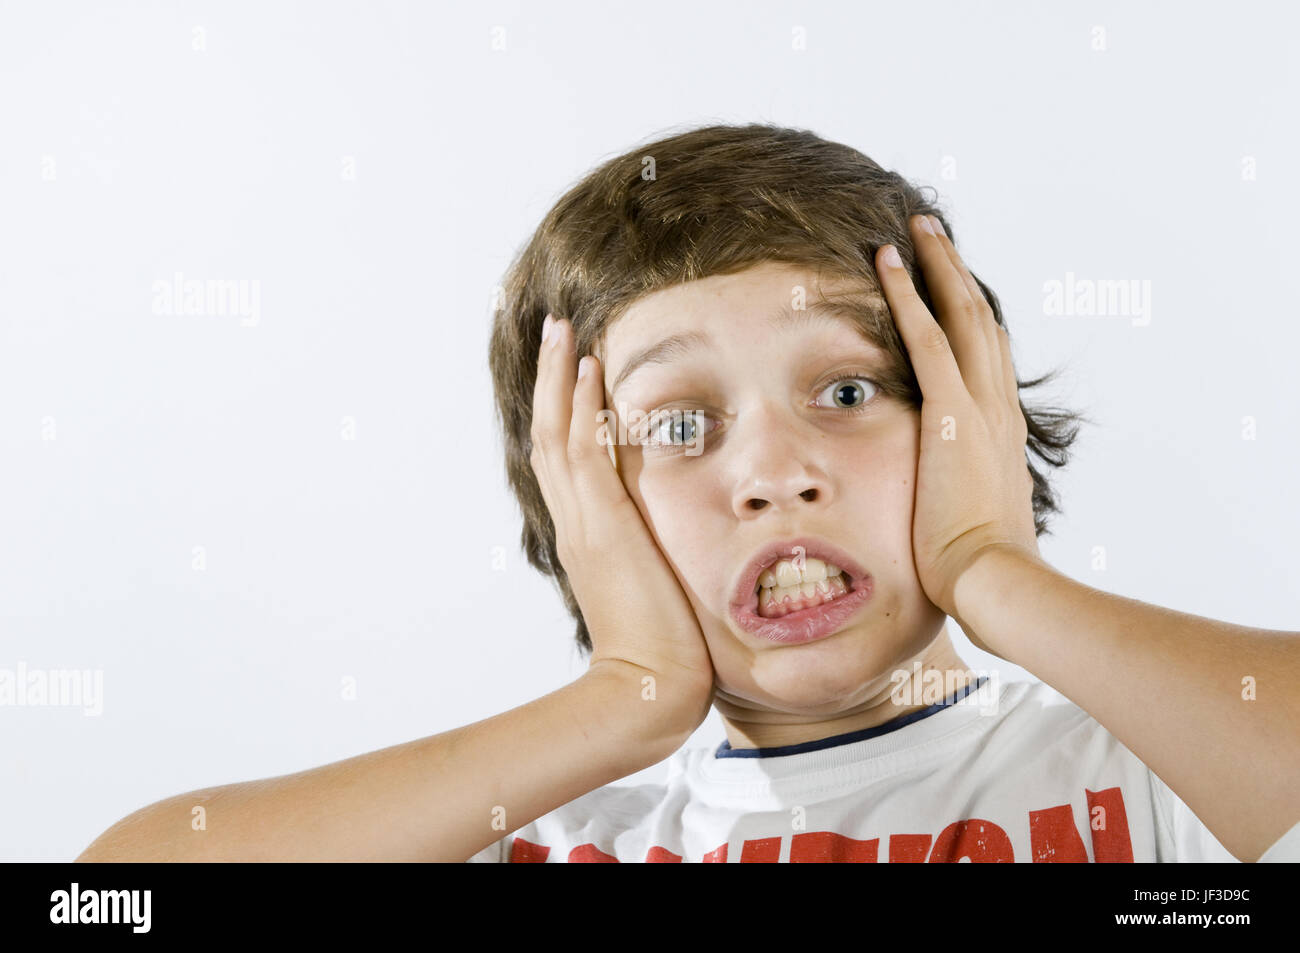 fearful grimacing of boy on white Stock Photo